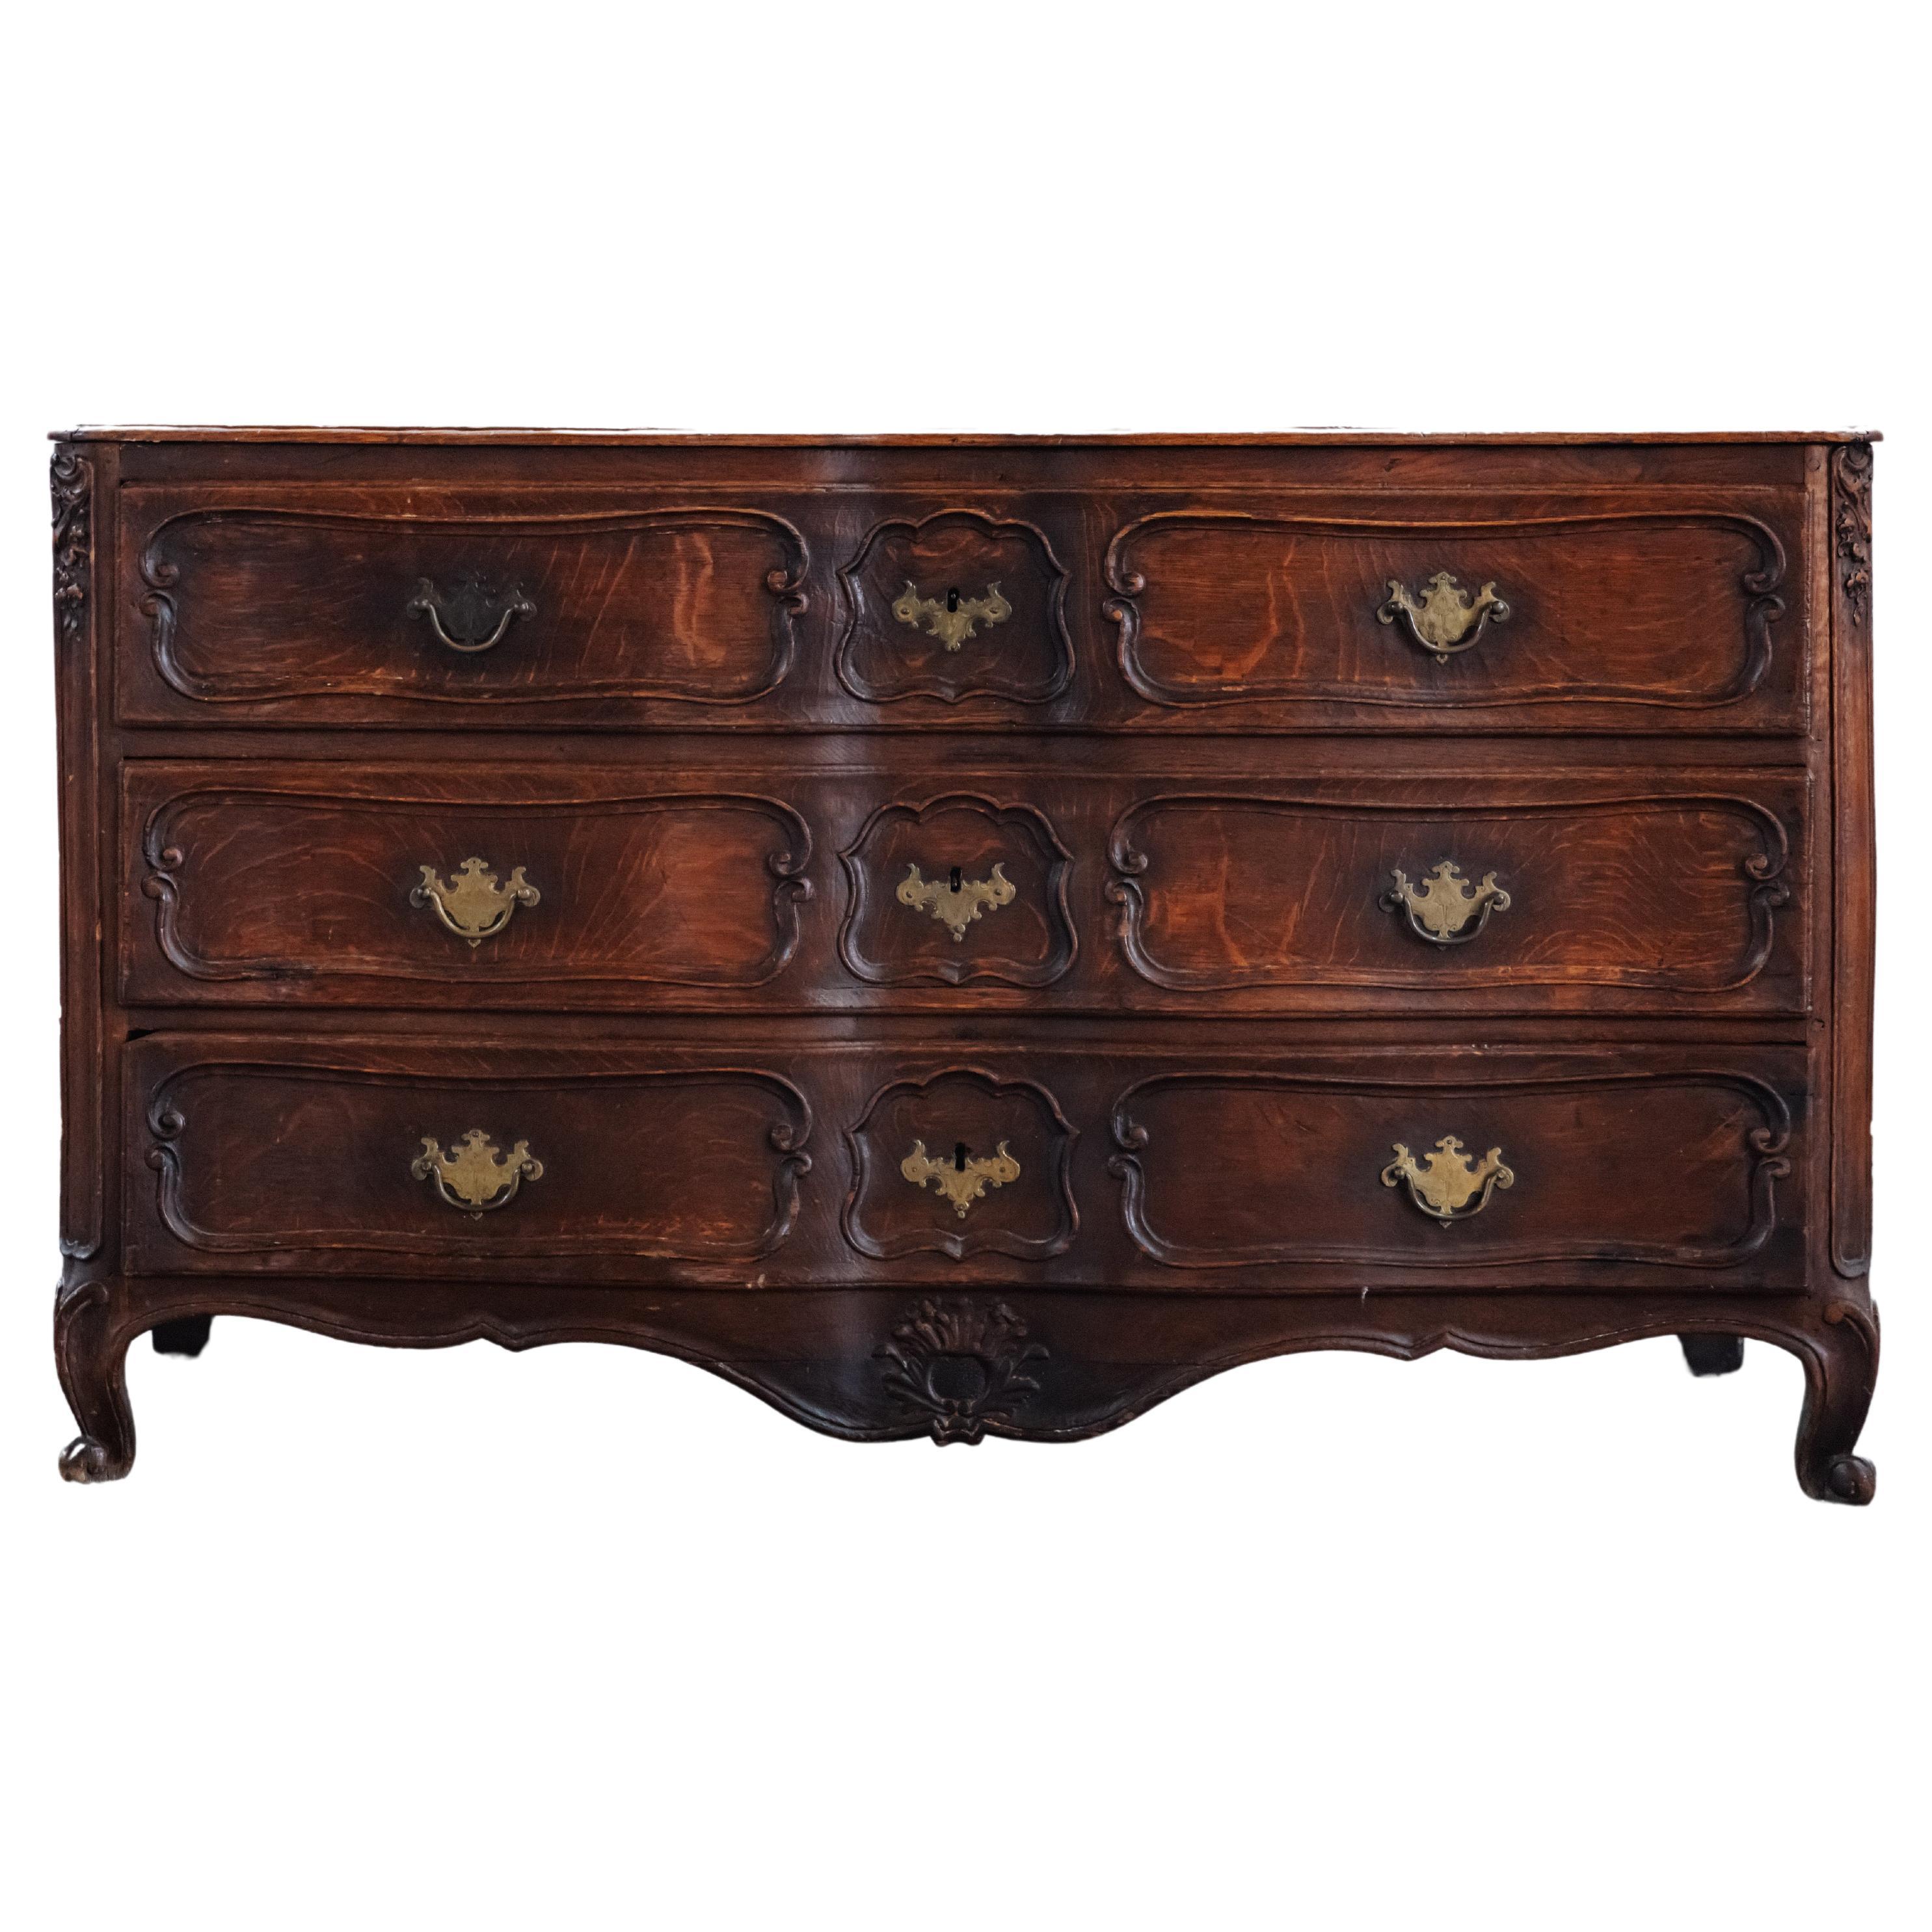 Early Oak Chest Of Drawers From France, Circa 1800